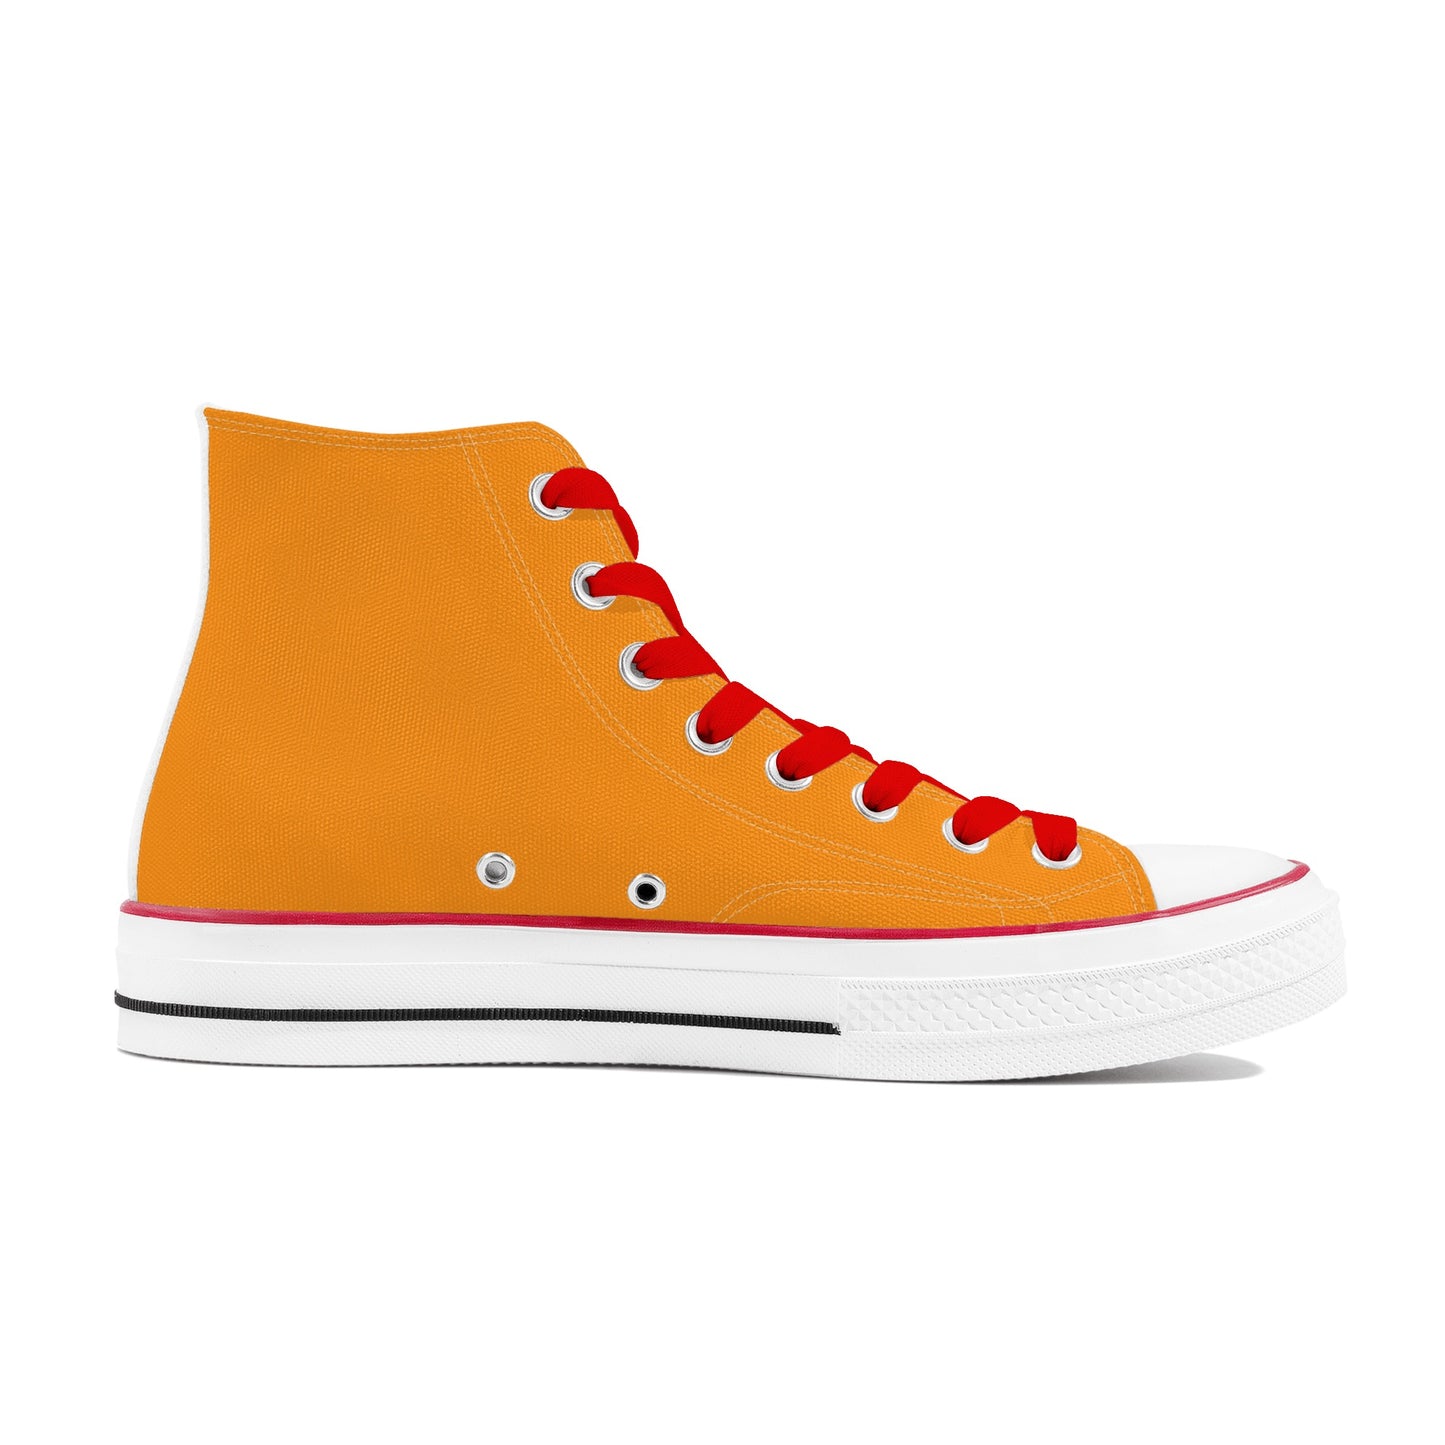 Riley - Classic High Top Canvas Shoes